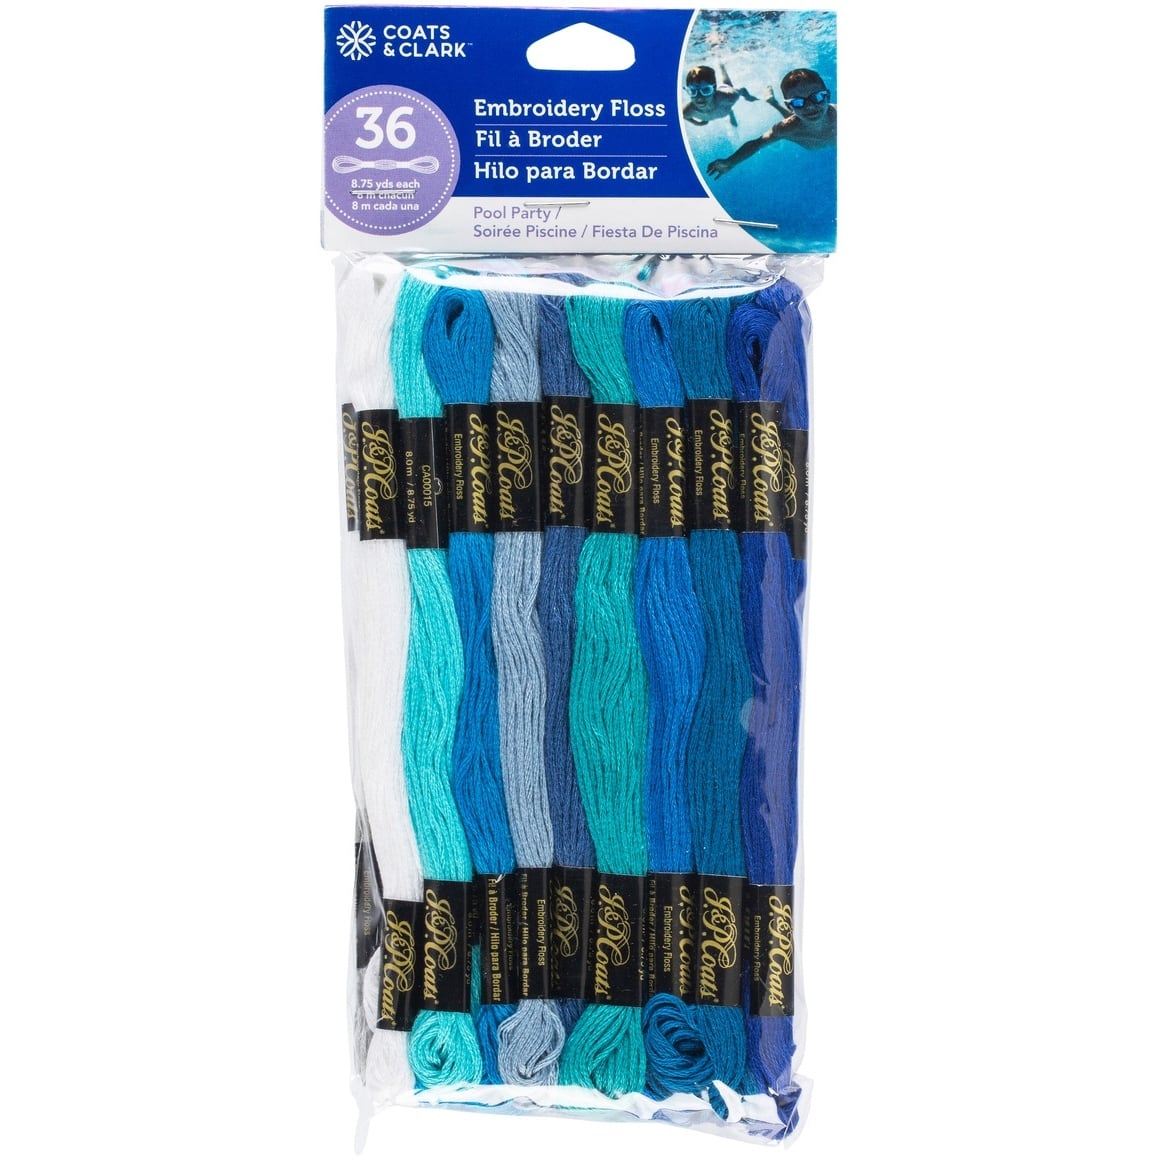 J & P Coats Embroidery Floss Value Pack